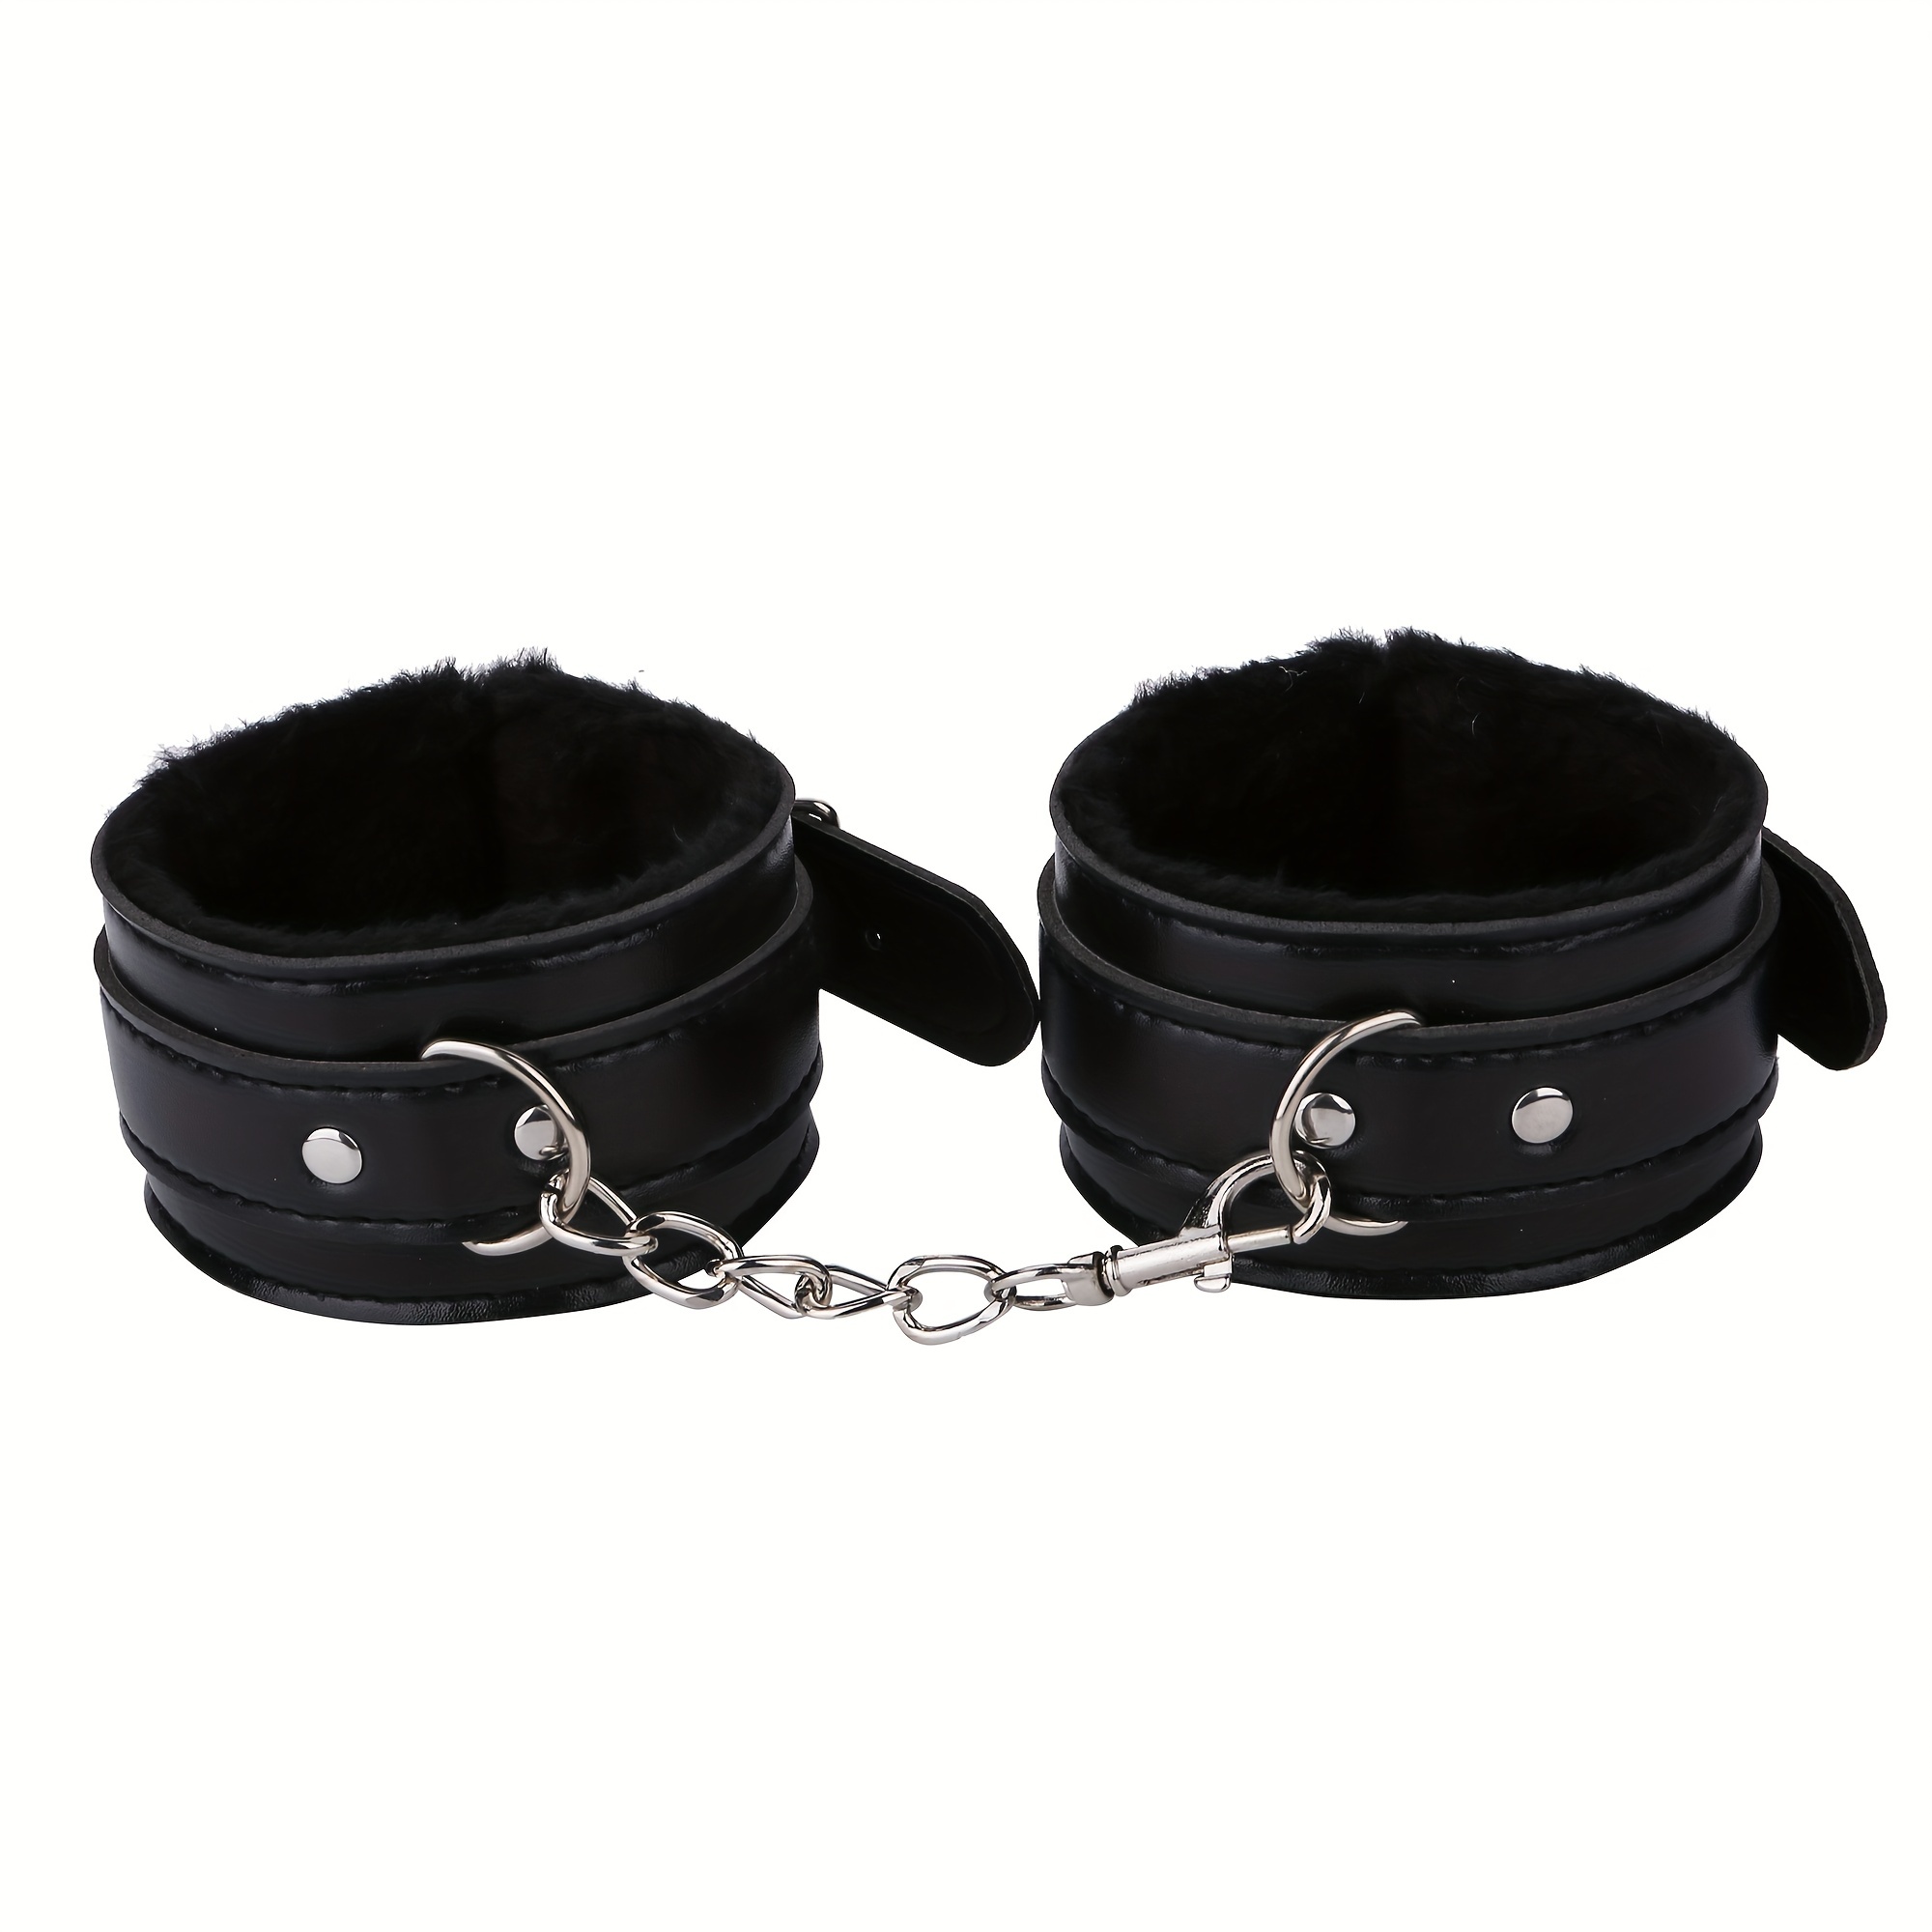  Sex Bondage Kit for Women: 10 PCS Restraint Leather Set BDSM  Toy with Sex Blindfold Handcuffs and Ankle Cuffs BDSM Whip Sex Rope, Bondage  Restraint Kits for Couples SM Games, Restraint